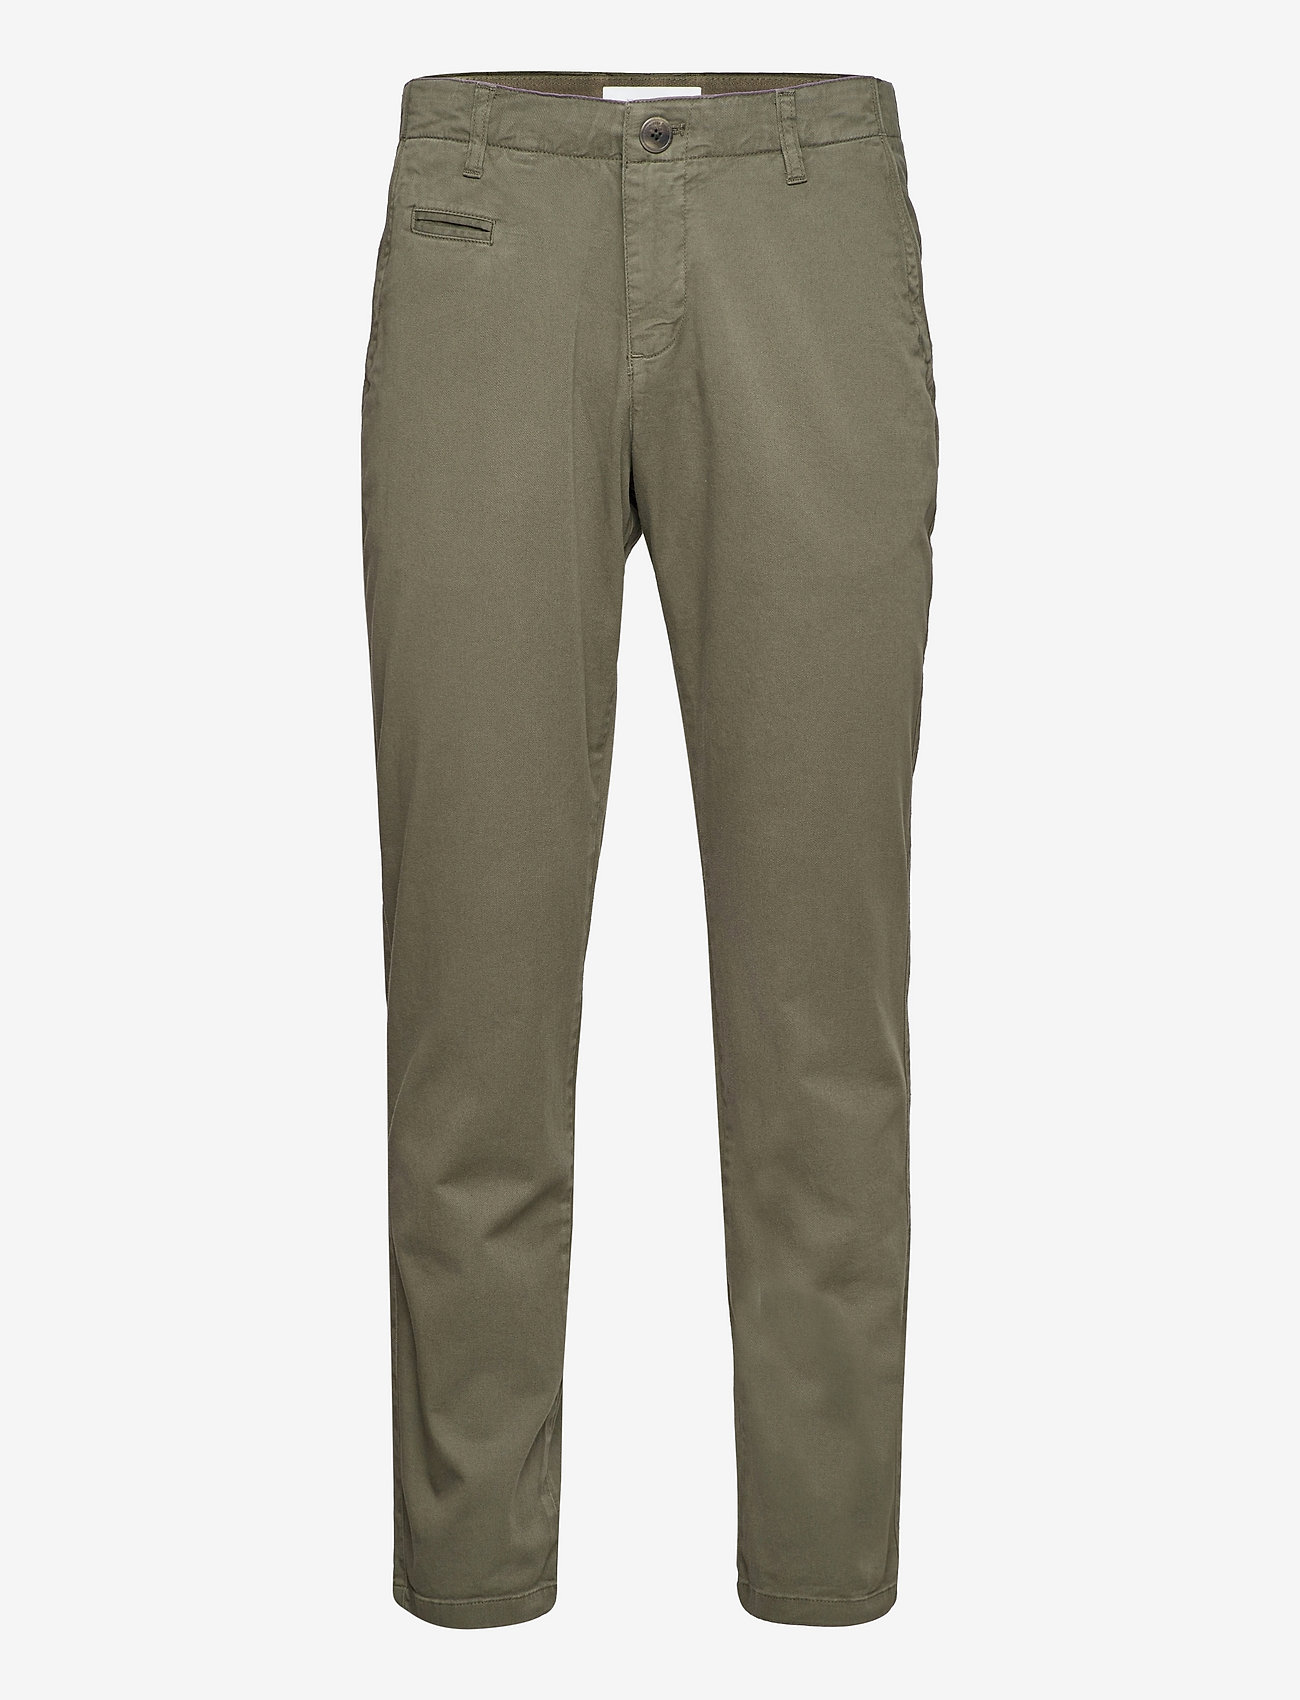 Knowledge Cotton Apparel - CHUCK regular stretched chino pant - chino's - forrest night - 0